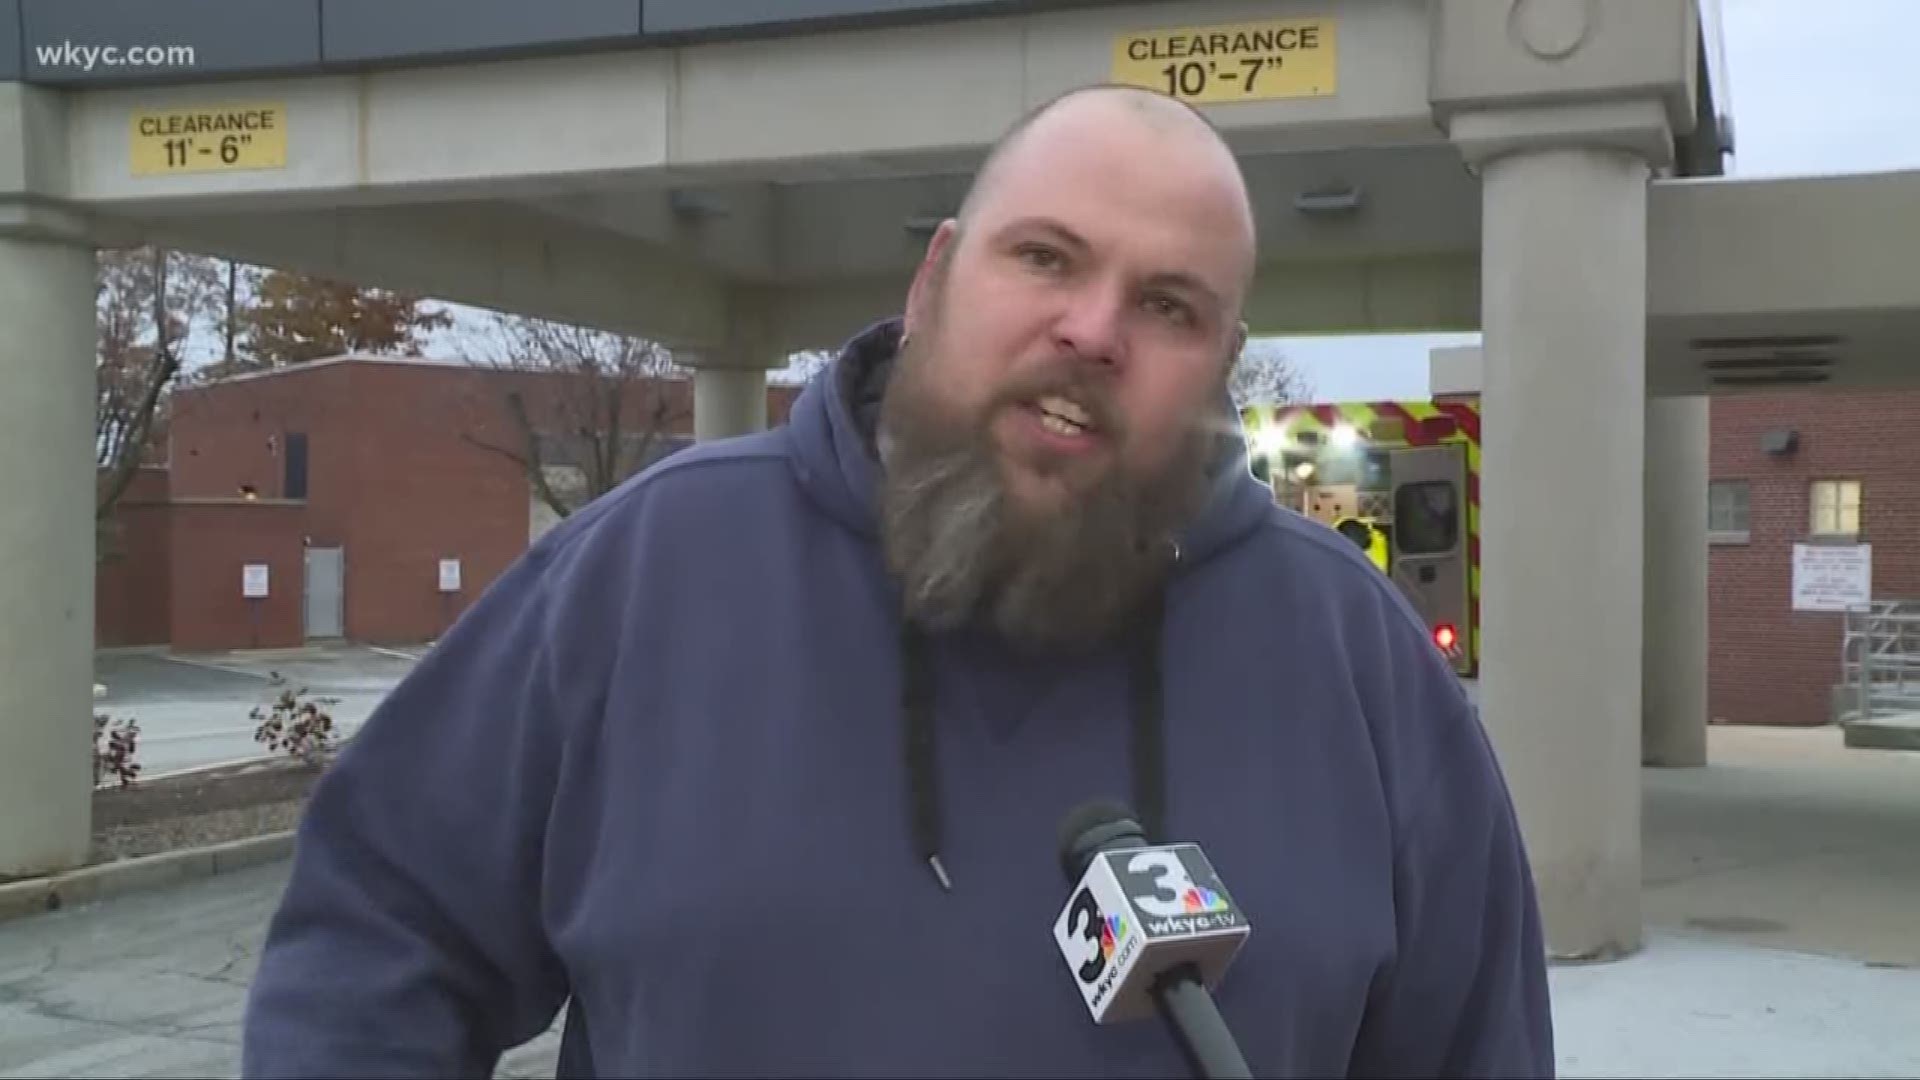 How did employees, patients, and families react to active shooter situation at Medina Hospital